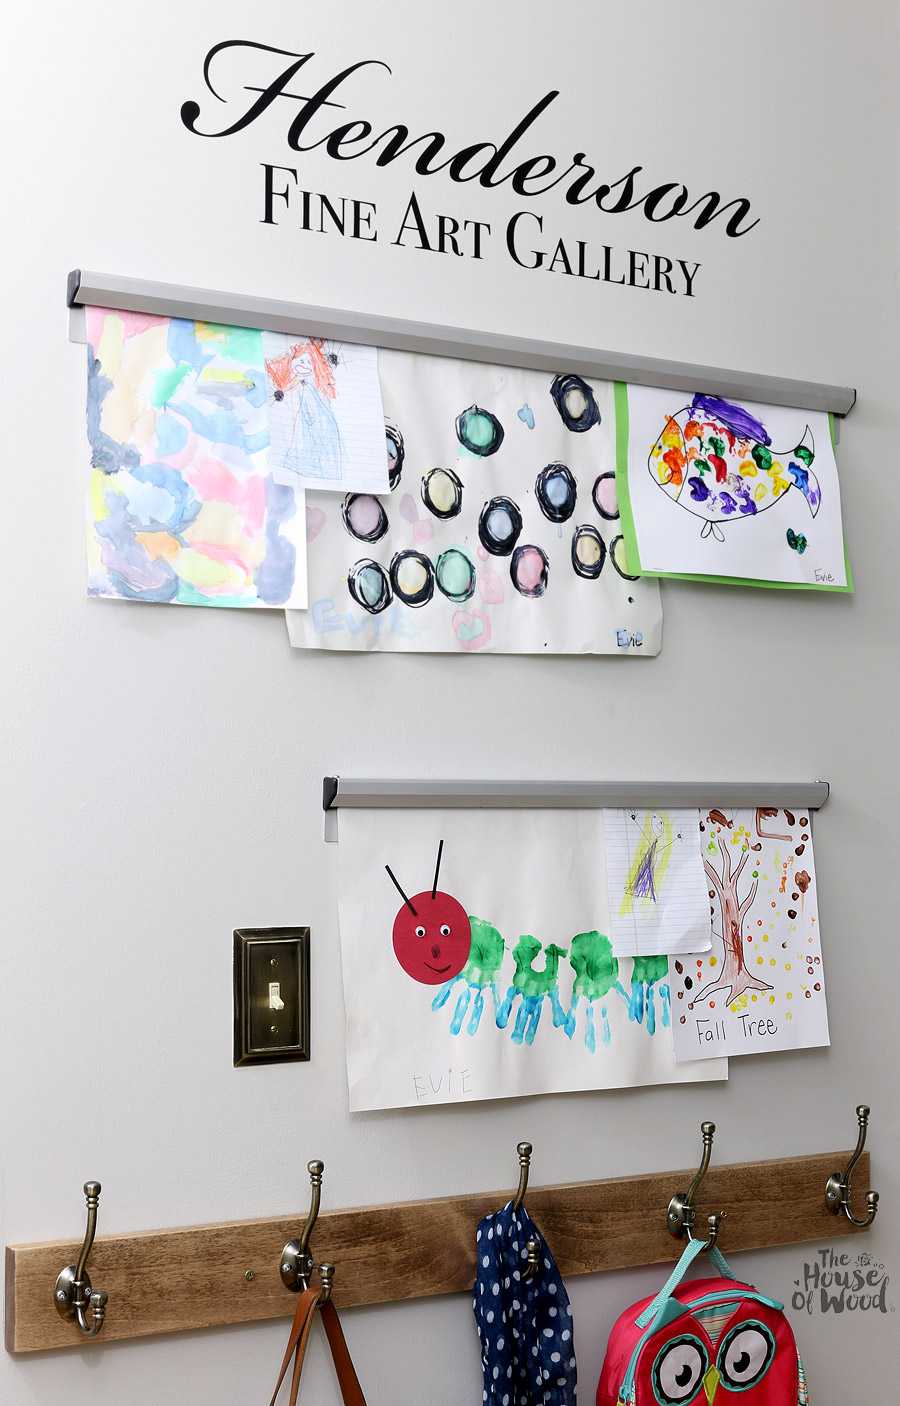 How to display kids artwork - easily change out art with ticket hangers. Brilliant!